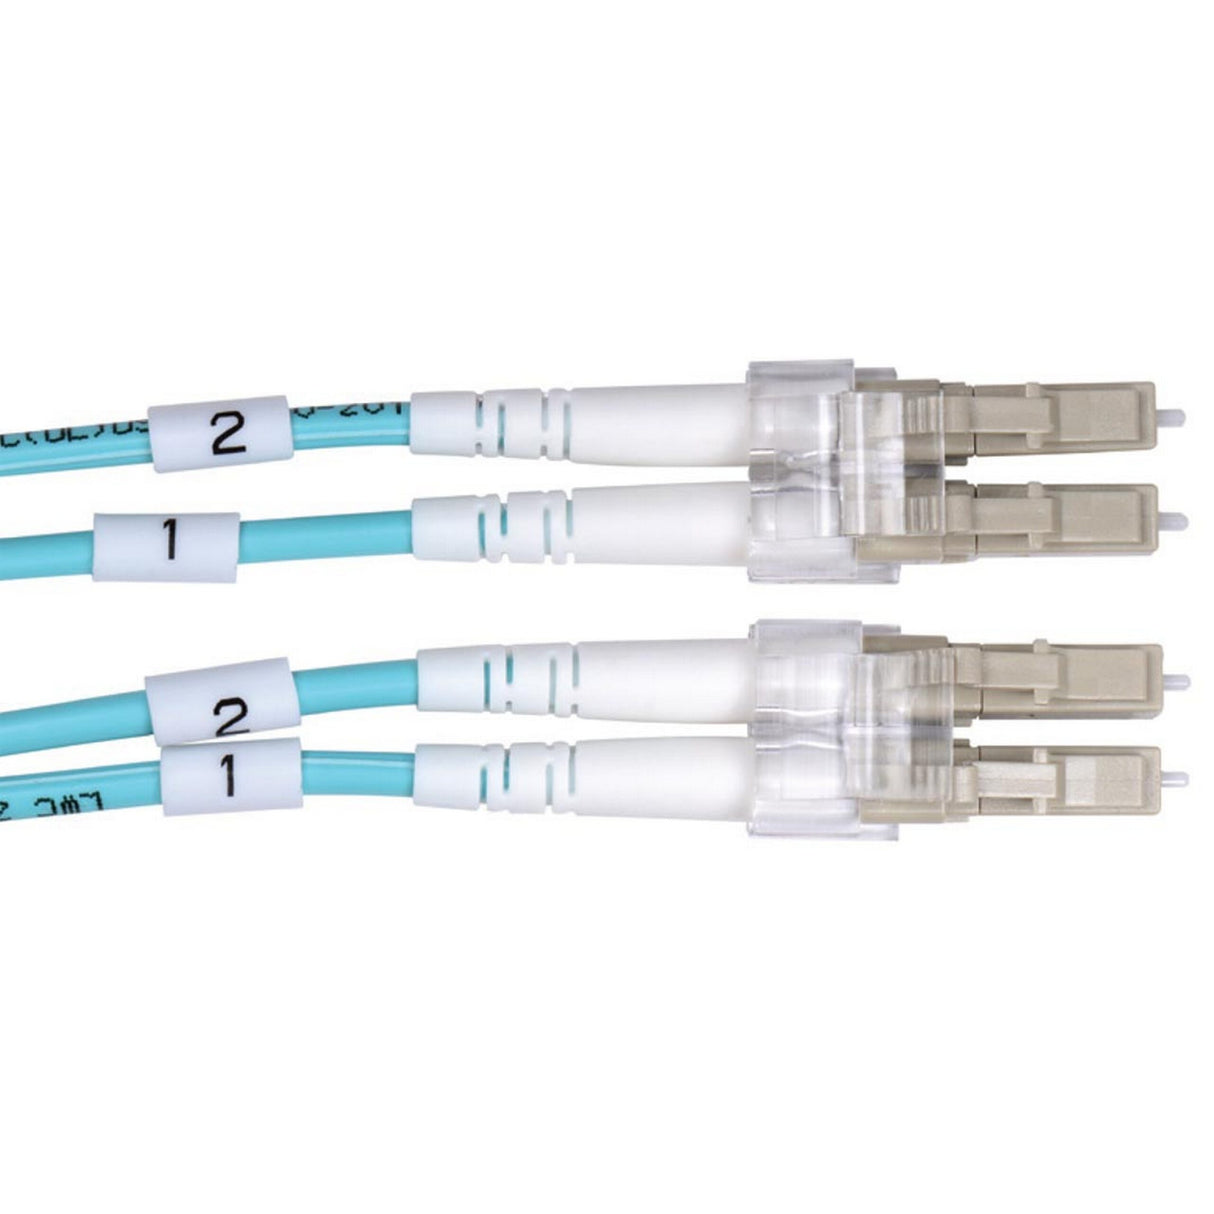 Cleerline DOM3LCLC02M 6.56-Foot SSF OM3 Multimode LC-LC Fiber Optic Patch Cable